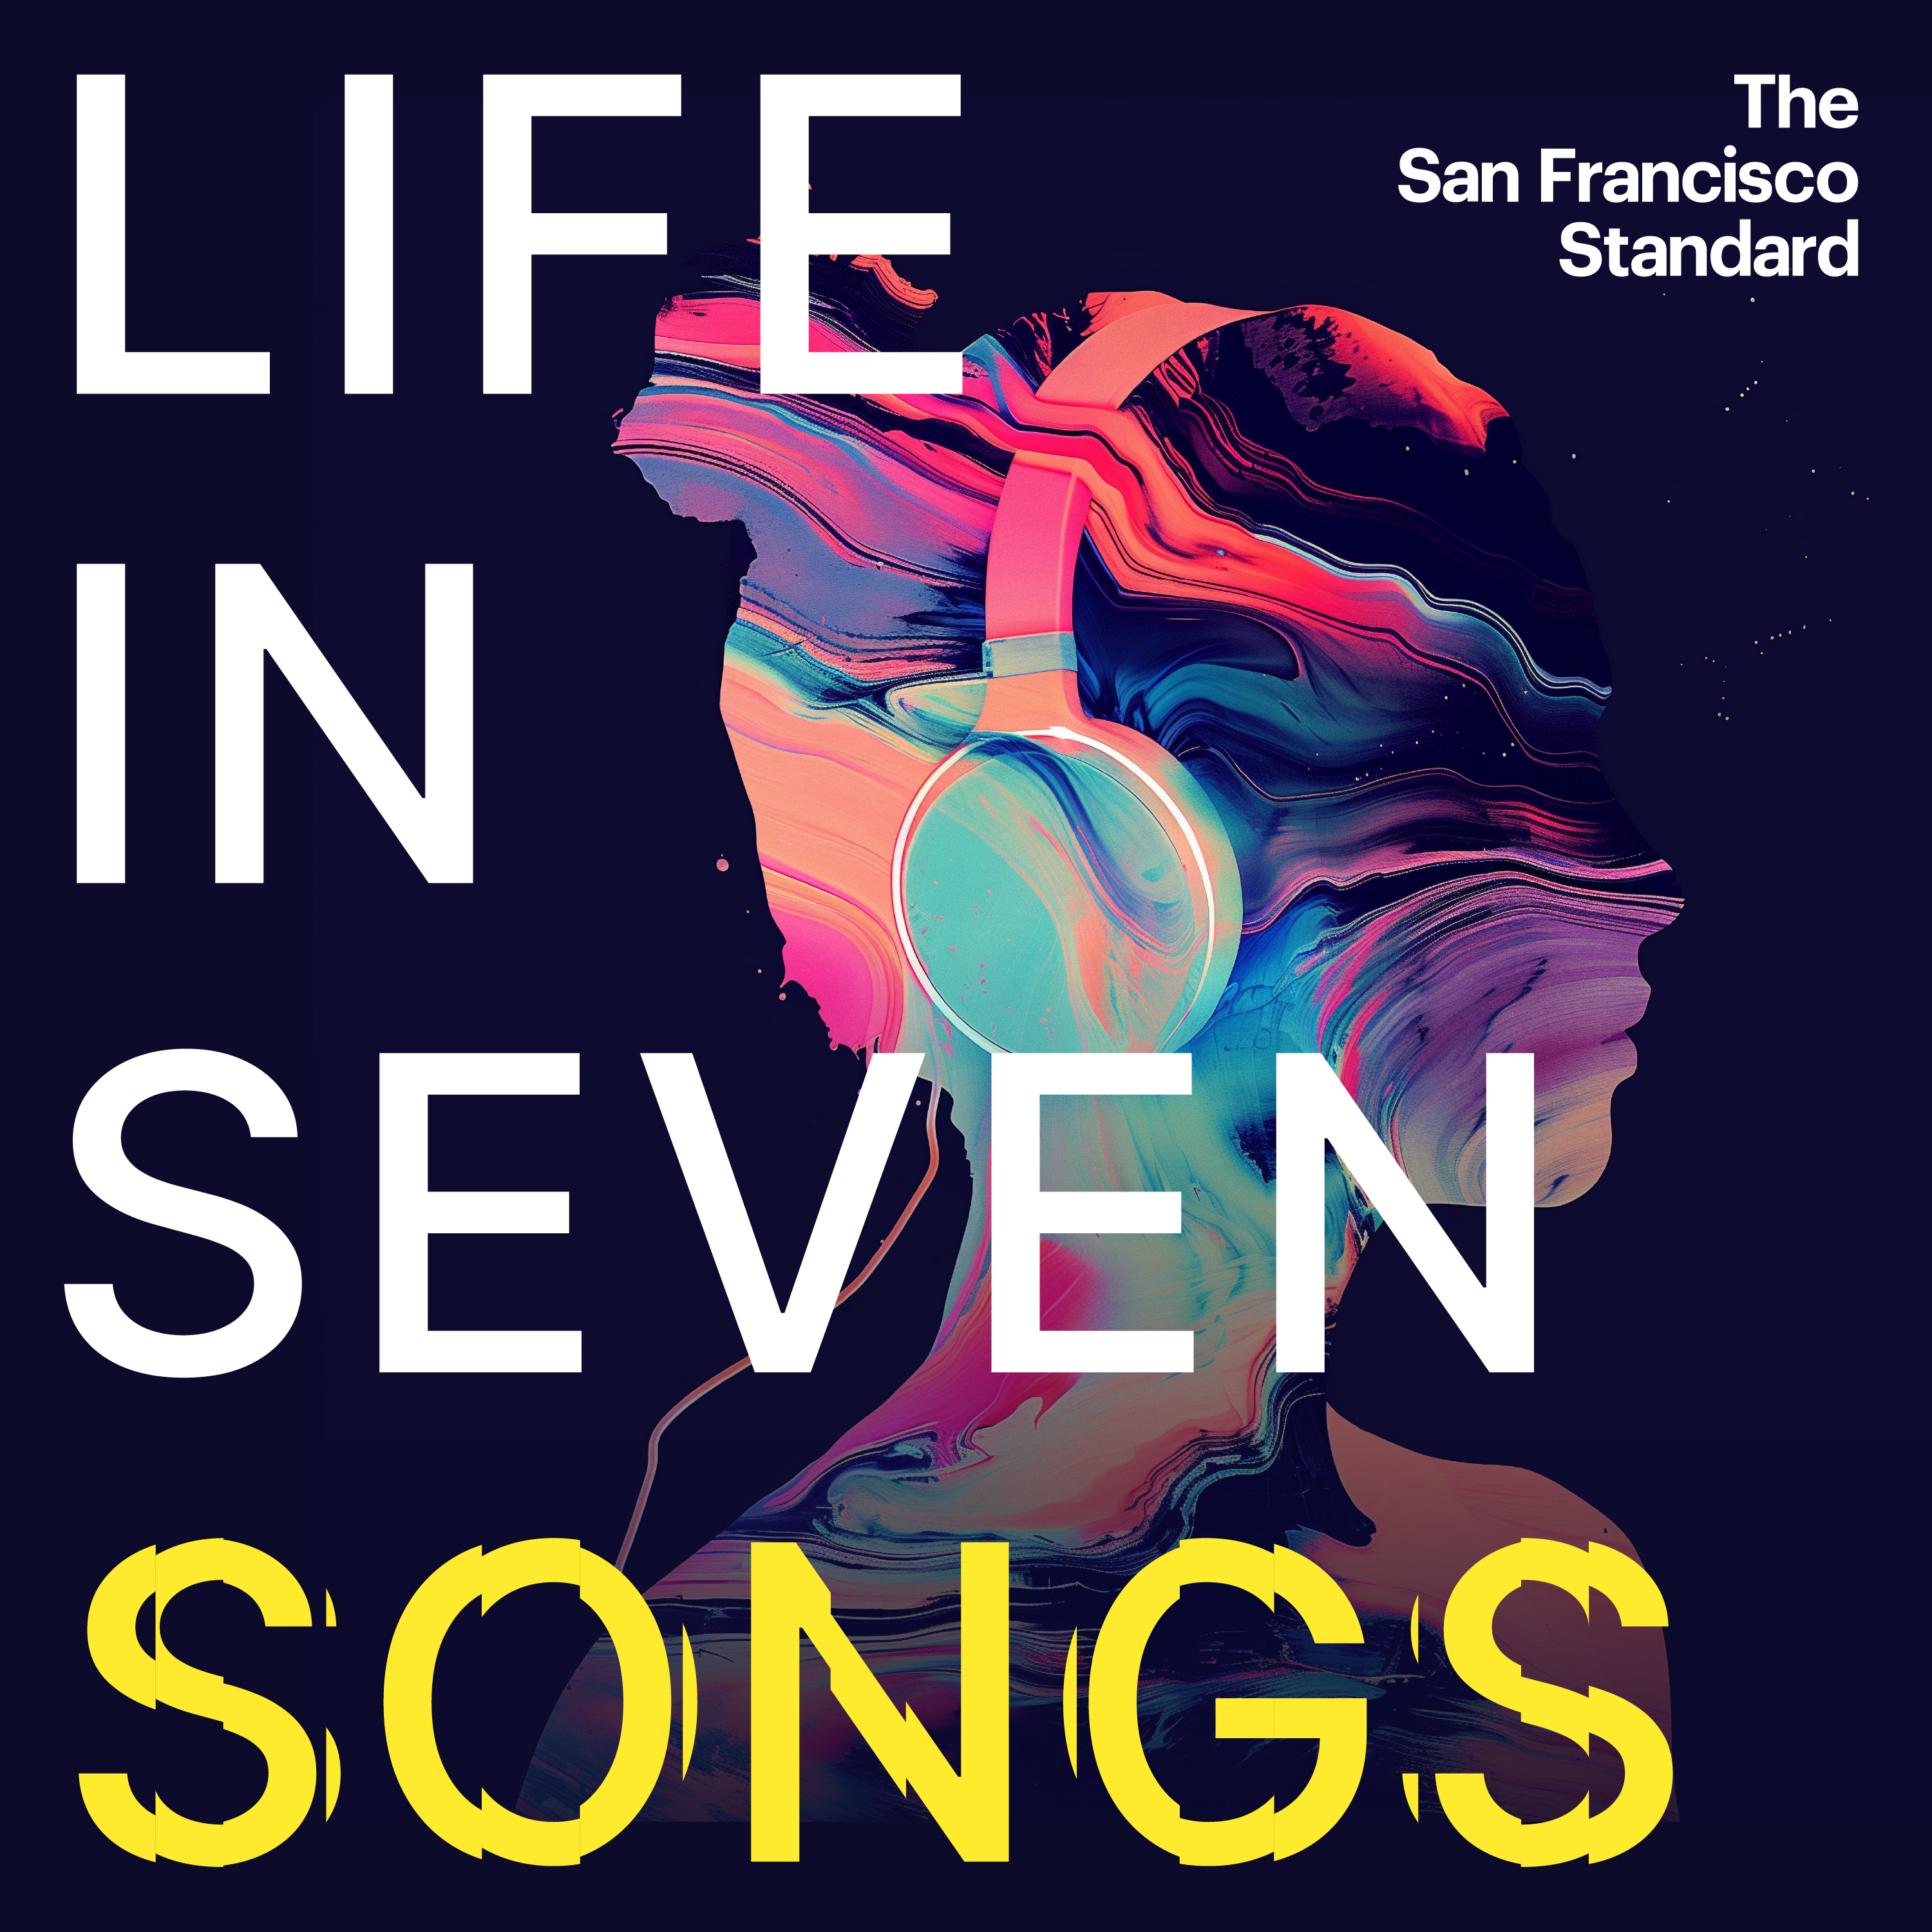 The podcast art for the show "Life in Seven Songs" depicts the silhouette of a woman wearing headphones with a pink, purple and yellow color palette.